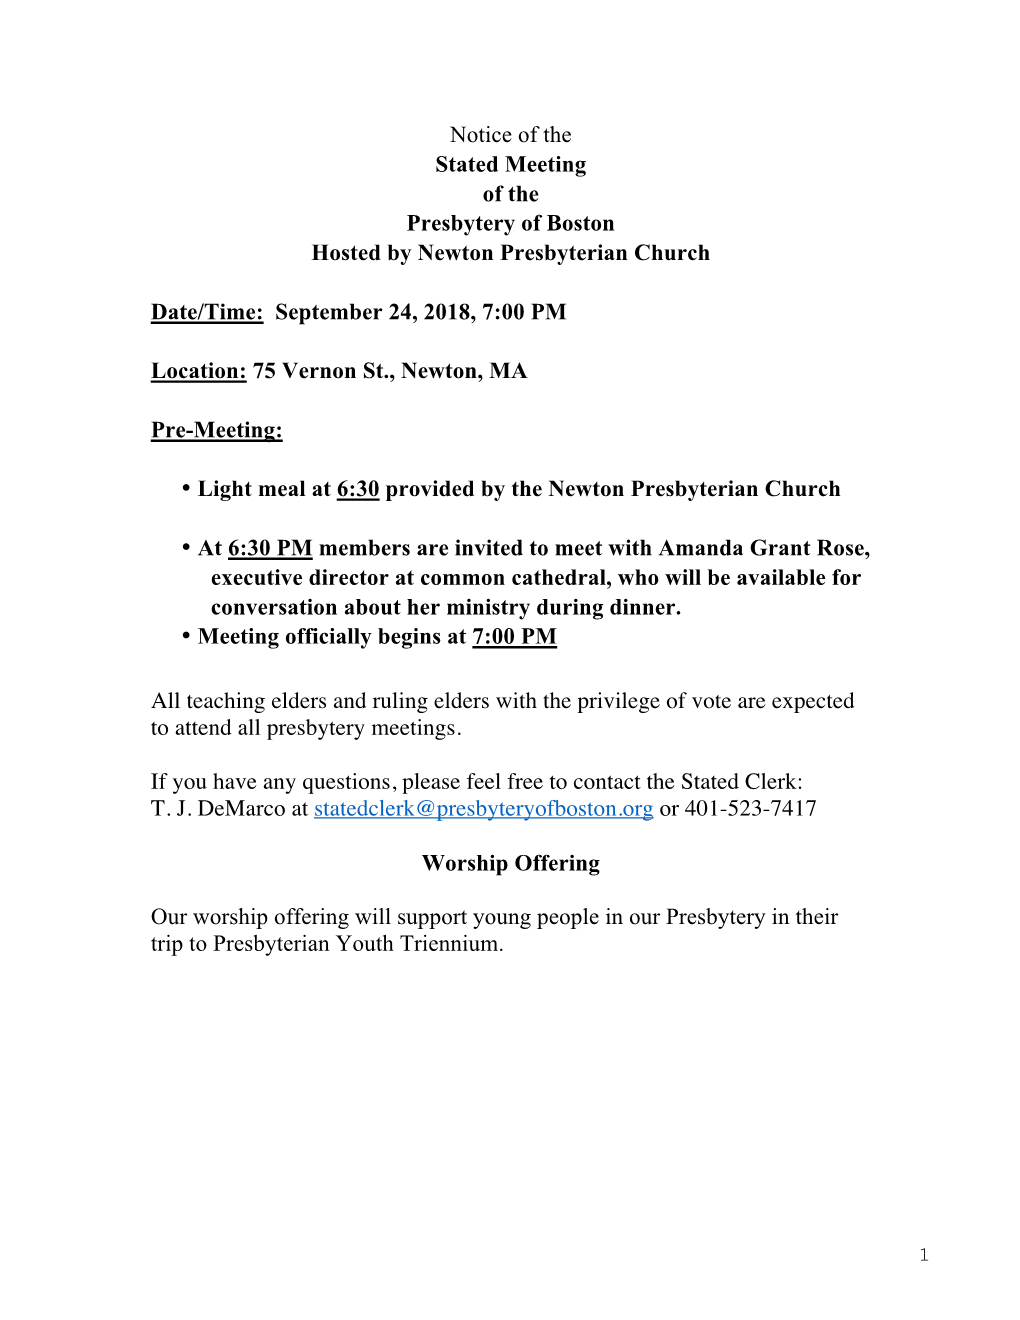 Notice of the Stated Meeting of the Presbytery of Boston Hosted by Newton Presbyterian Church